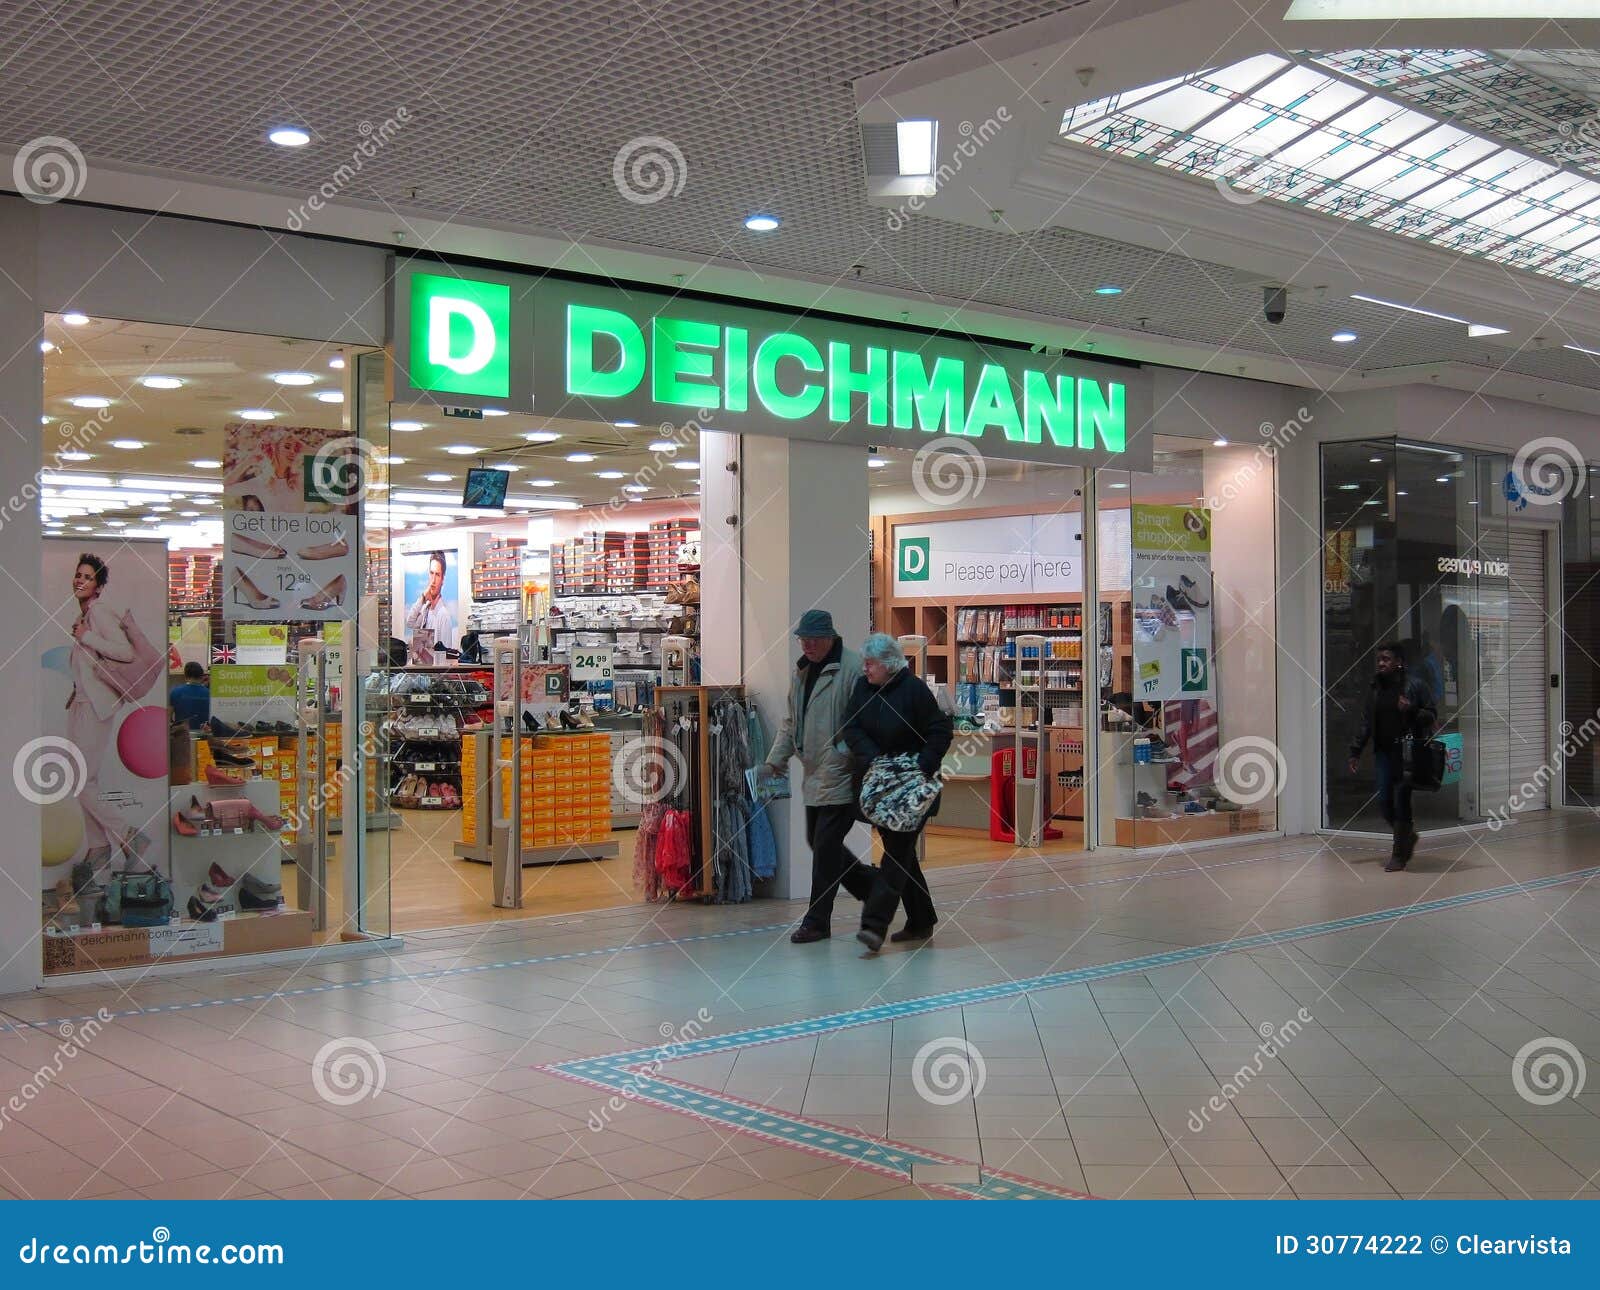 Deichmann Stores Photos - & Royalty-Free Stock Photos from Dreamstime